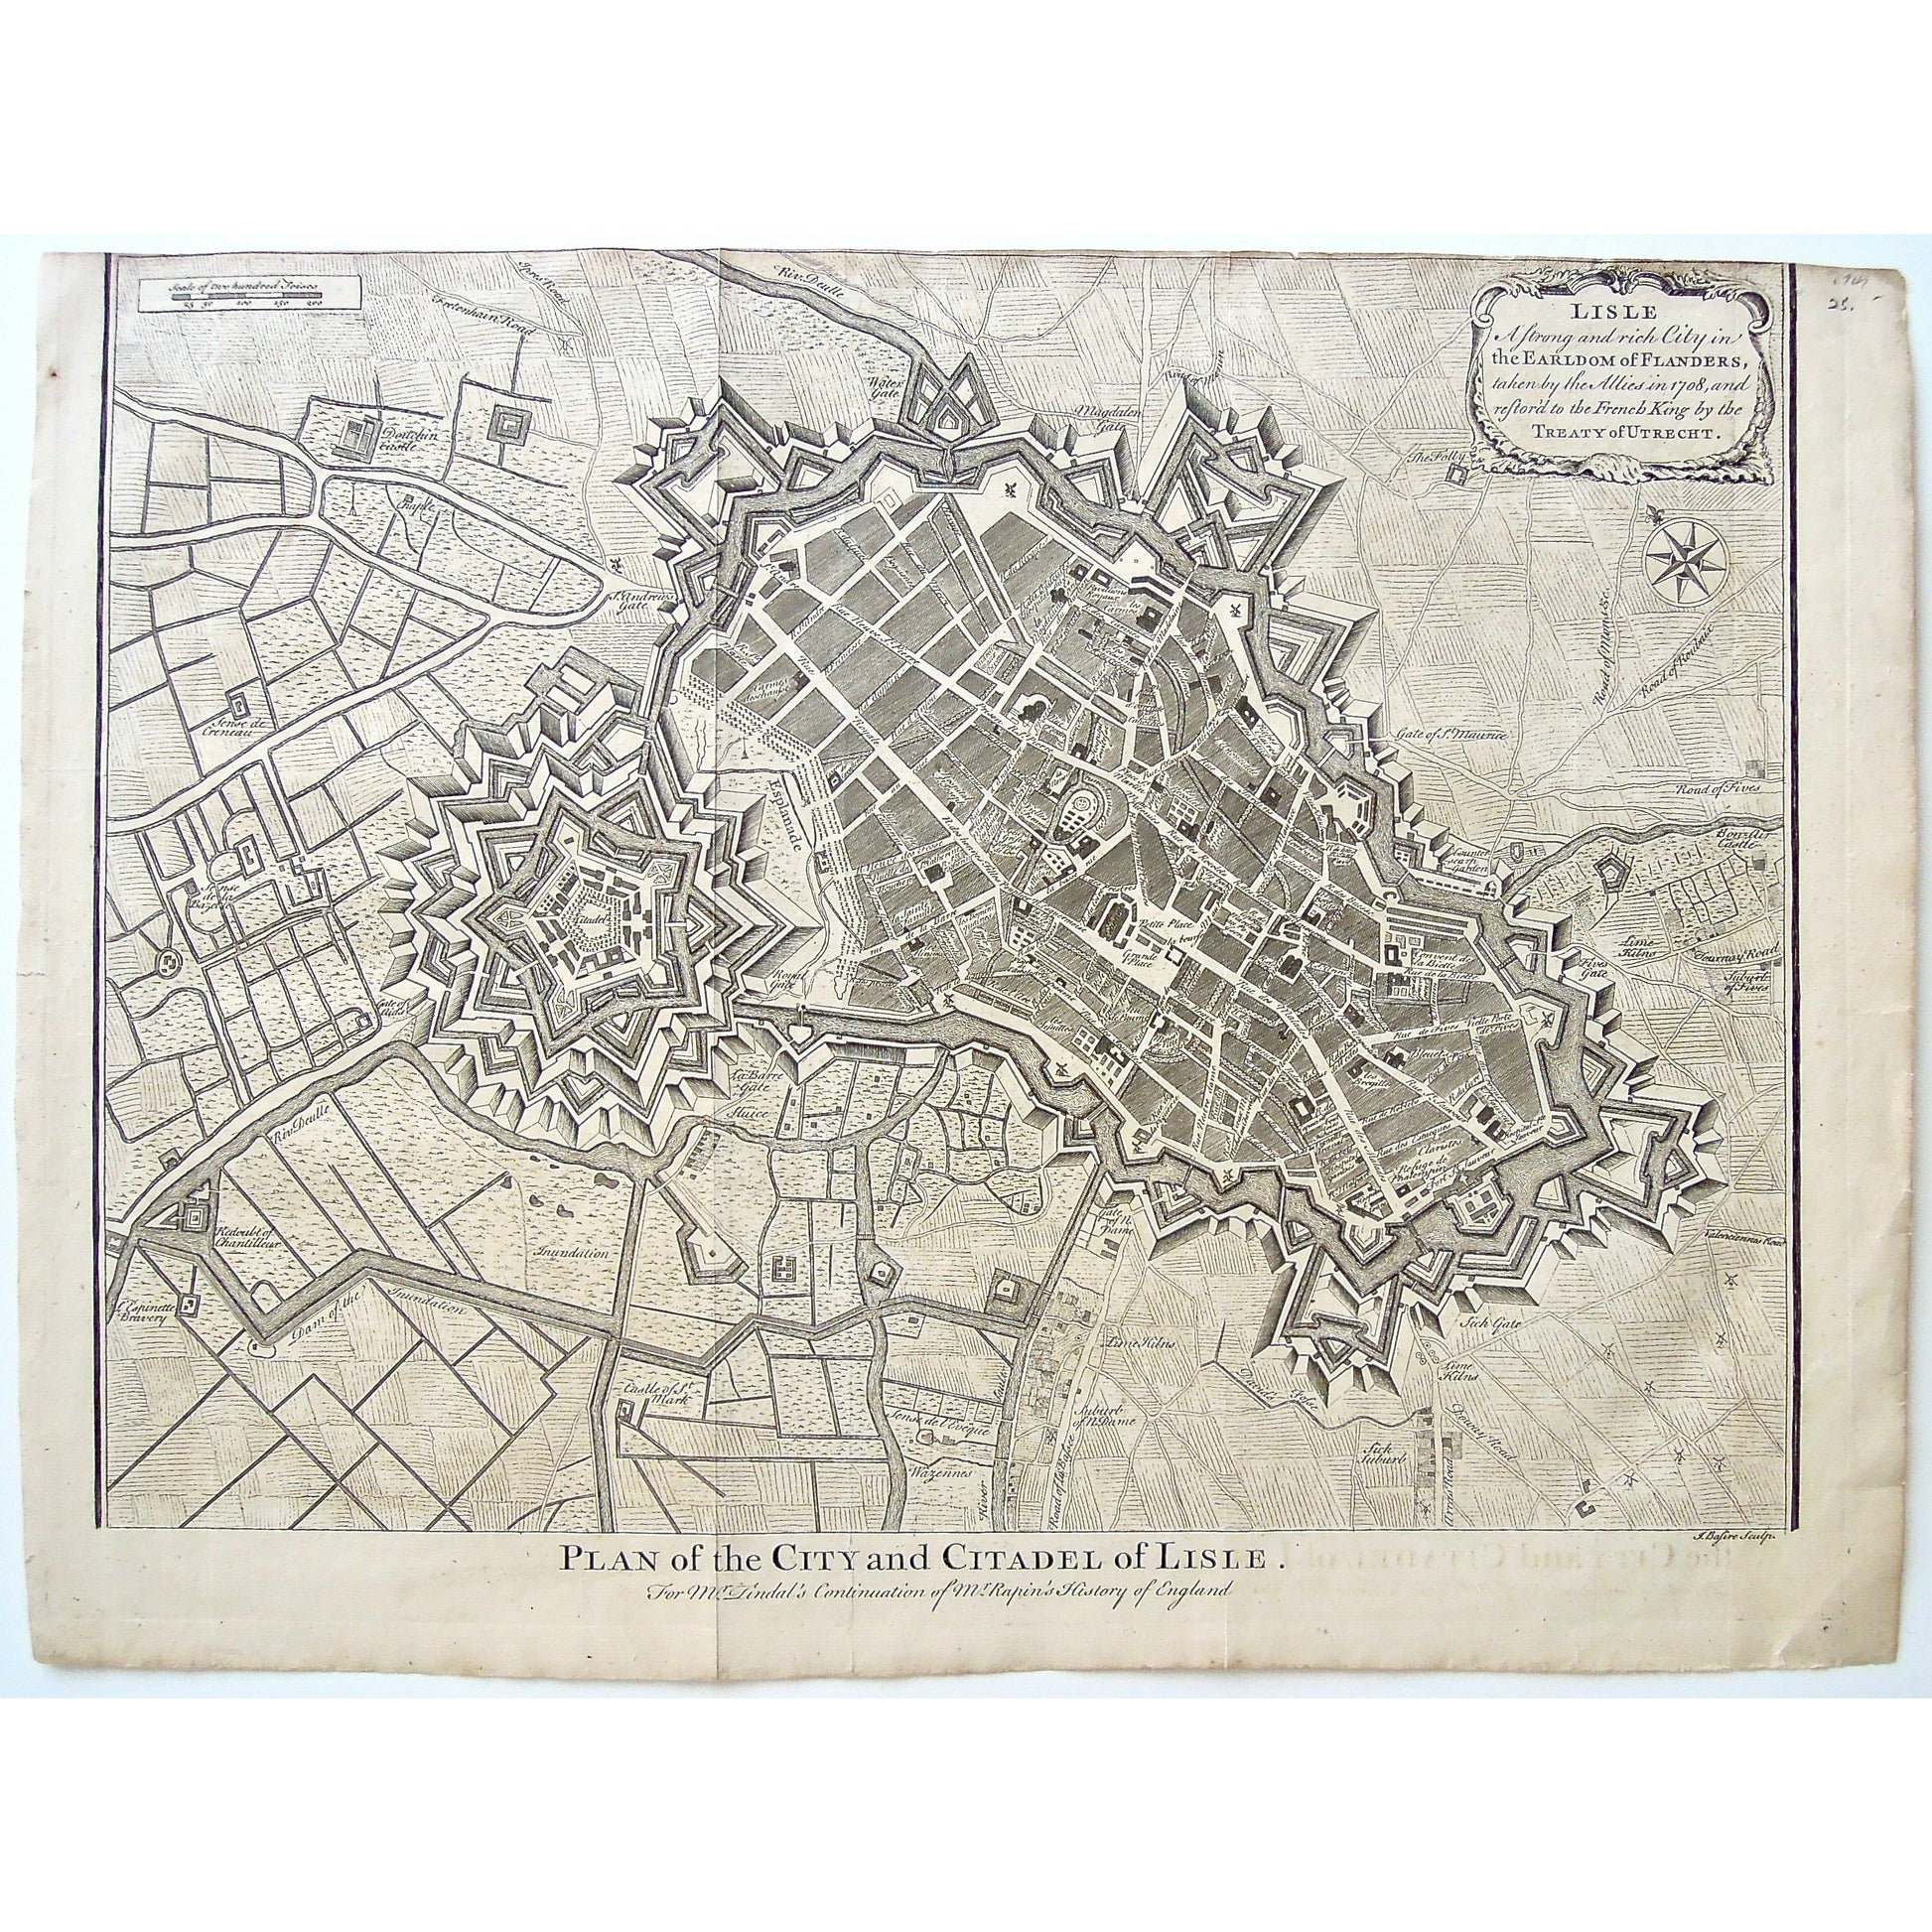 Map, Mappe, Maps, Mapmaking, Art, Decor, Interior, Plan of the City, Plan, City Plan, City of Lisle, Lisle, Citadel, Citadel of Lisle, Lisle Citadel, Mr. Tindal's Continuation of Mr. Rapin's History of England, Mr. Tindal, Mr. Rapin, History of England, J. Basire, Basire, Earldom of Flanders, Flanders, 1708, Taken by the allies, restored to the French King, Treaty of Utrecht, Lime-Kilns, Bon Air Castle, Gate of St. Maurice, Fives Gate, Tournay Road, Suburb of Fives, Sick Suburb, Road of Bassee, Wazennes, 